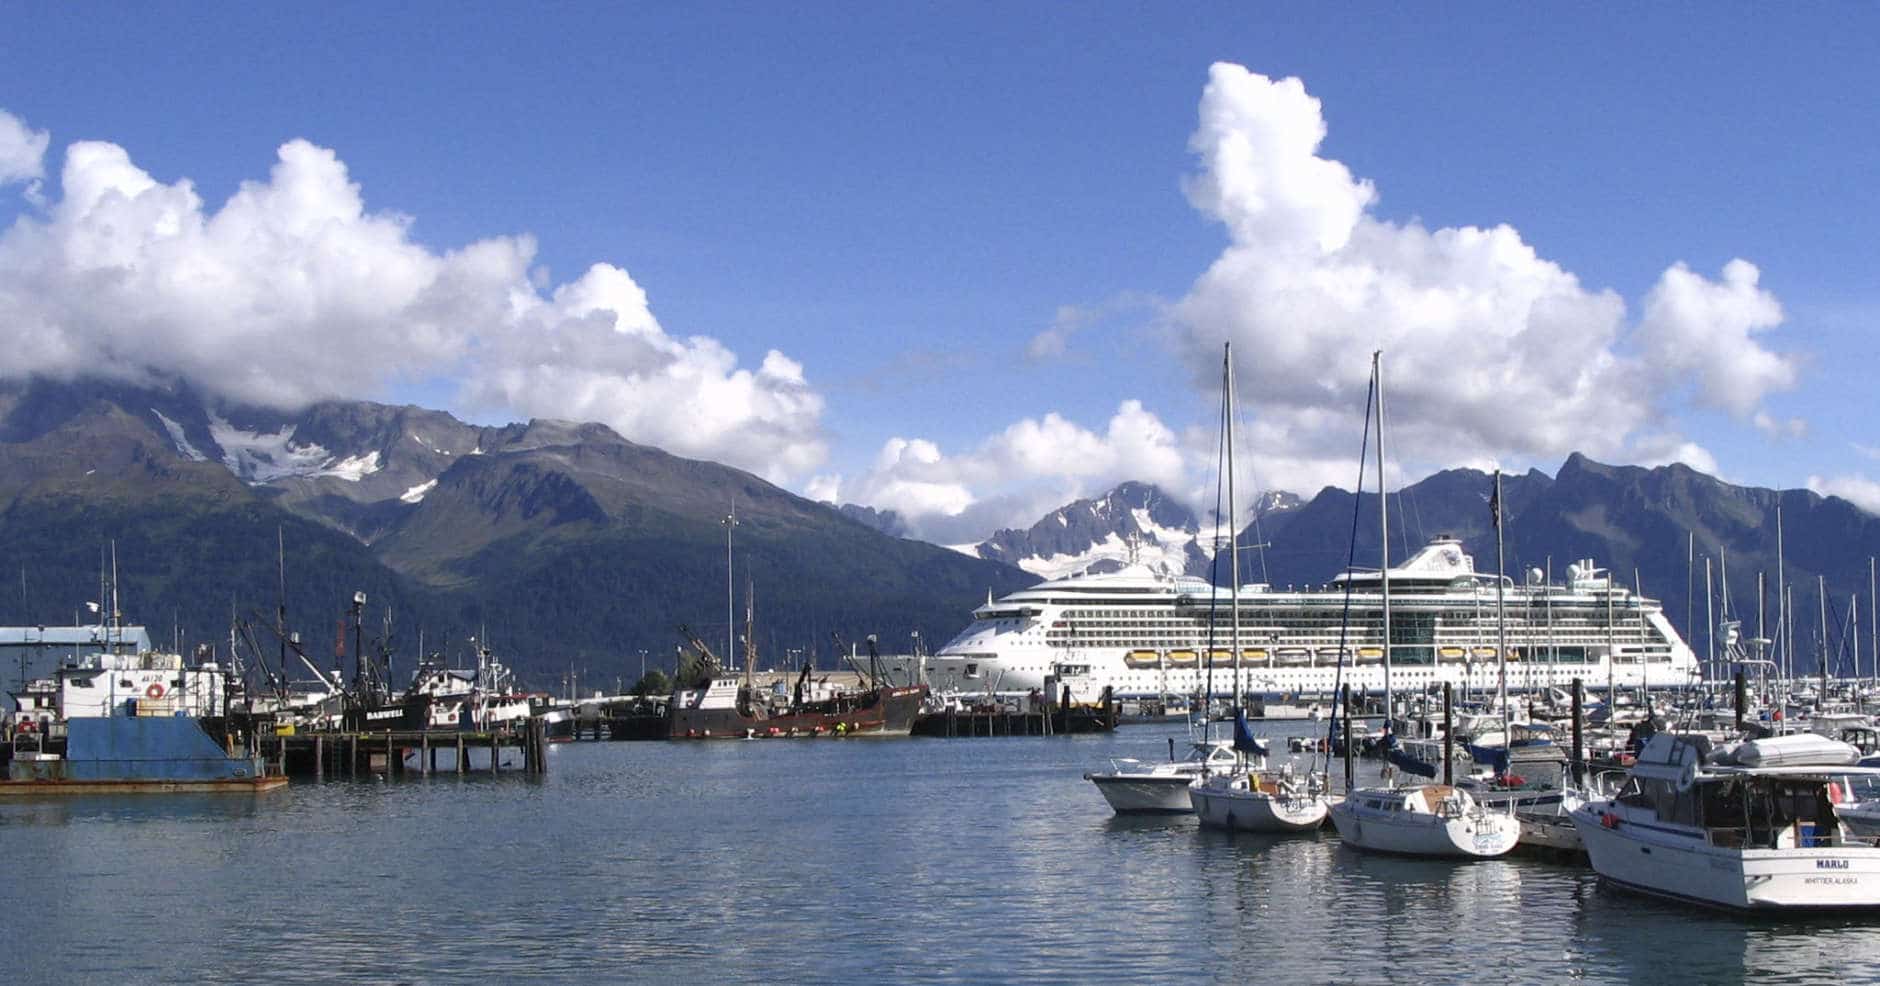 ** FOR STORY SLUGGED CRUCEROS **  Royal Caribbean's "Radiance of the Seas" is shown in Seward, Alaska, in this Sept. 7, 2007 photo, dwarfing the fishing boats in the port. (AP Photo/Beth J. Harpaz)